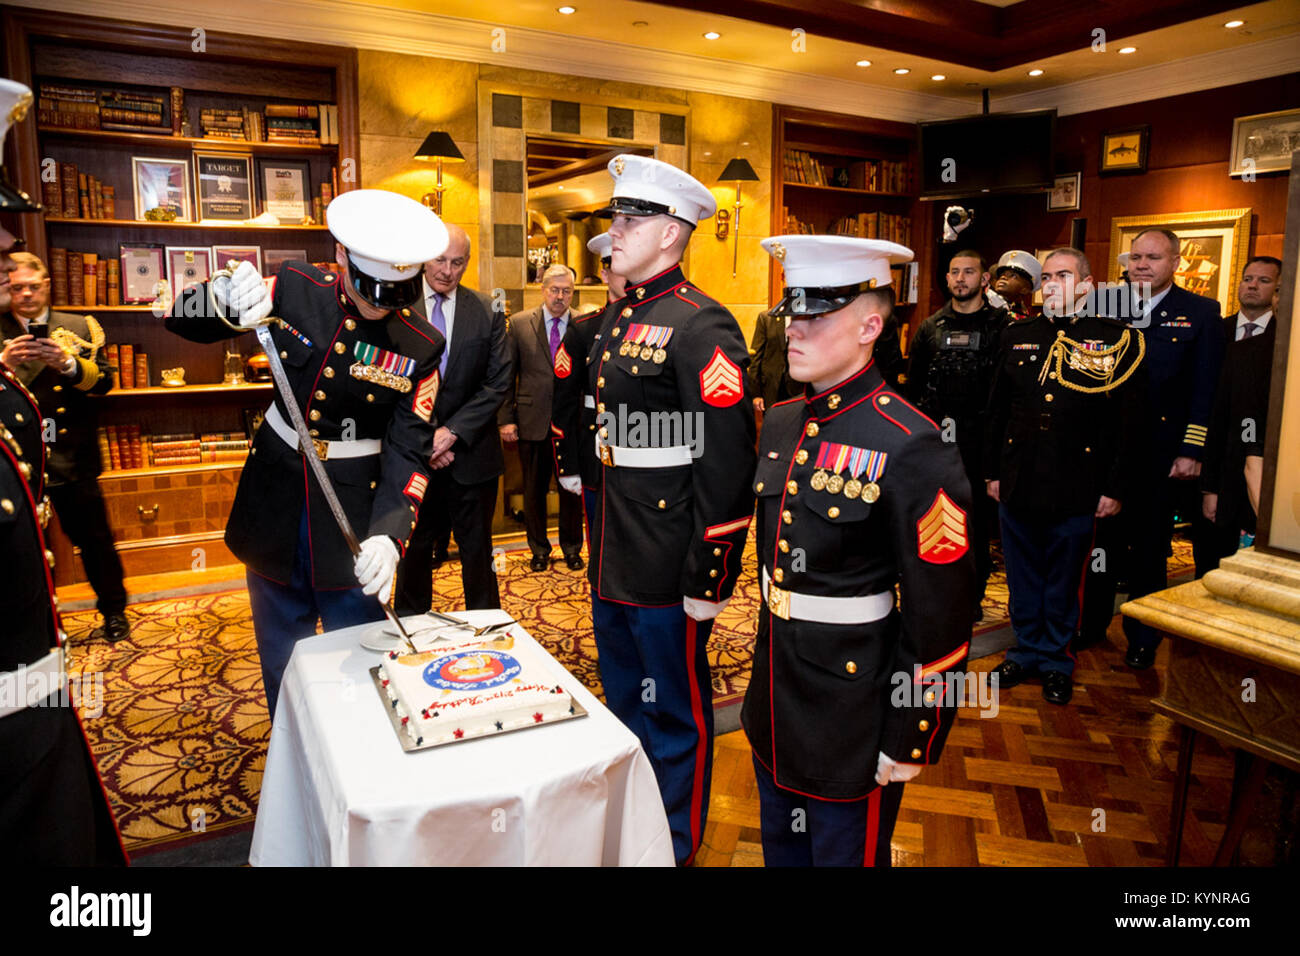 Chief of Staff to the President of the United States Gen. John Kelly participates in a Cake Cutting Ceremony celebrating the Marine Corps Birthday Friday, November 10, 2017, at the St. Regis Hotel in Beijing, China.   (Official White House Photo by Shealah Craighead) President Trump's Trip to Asia 38307920826 o Stock Photo